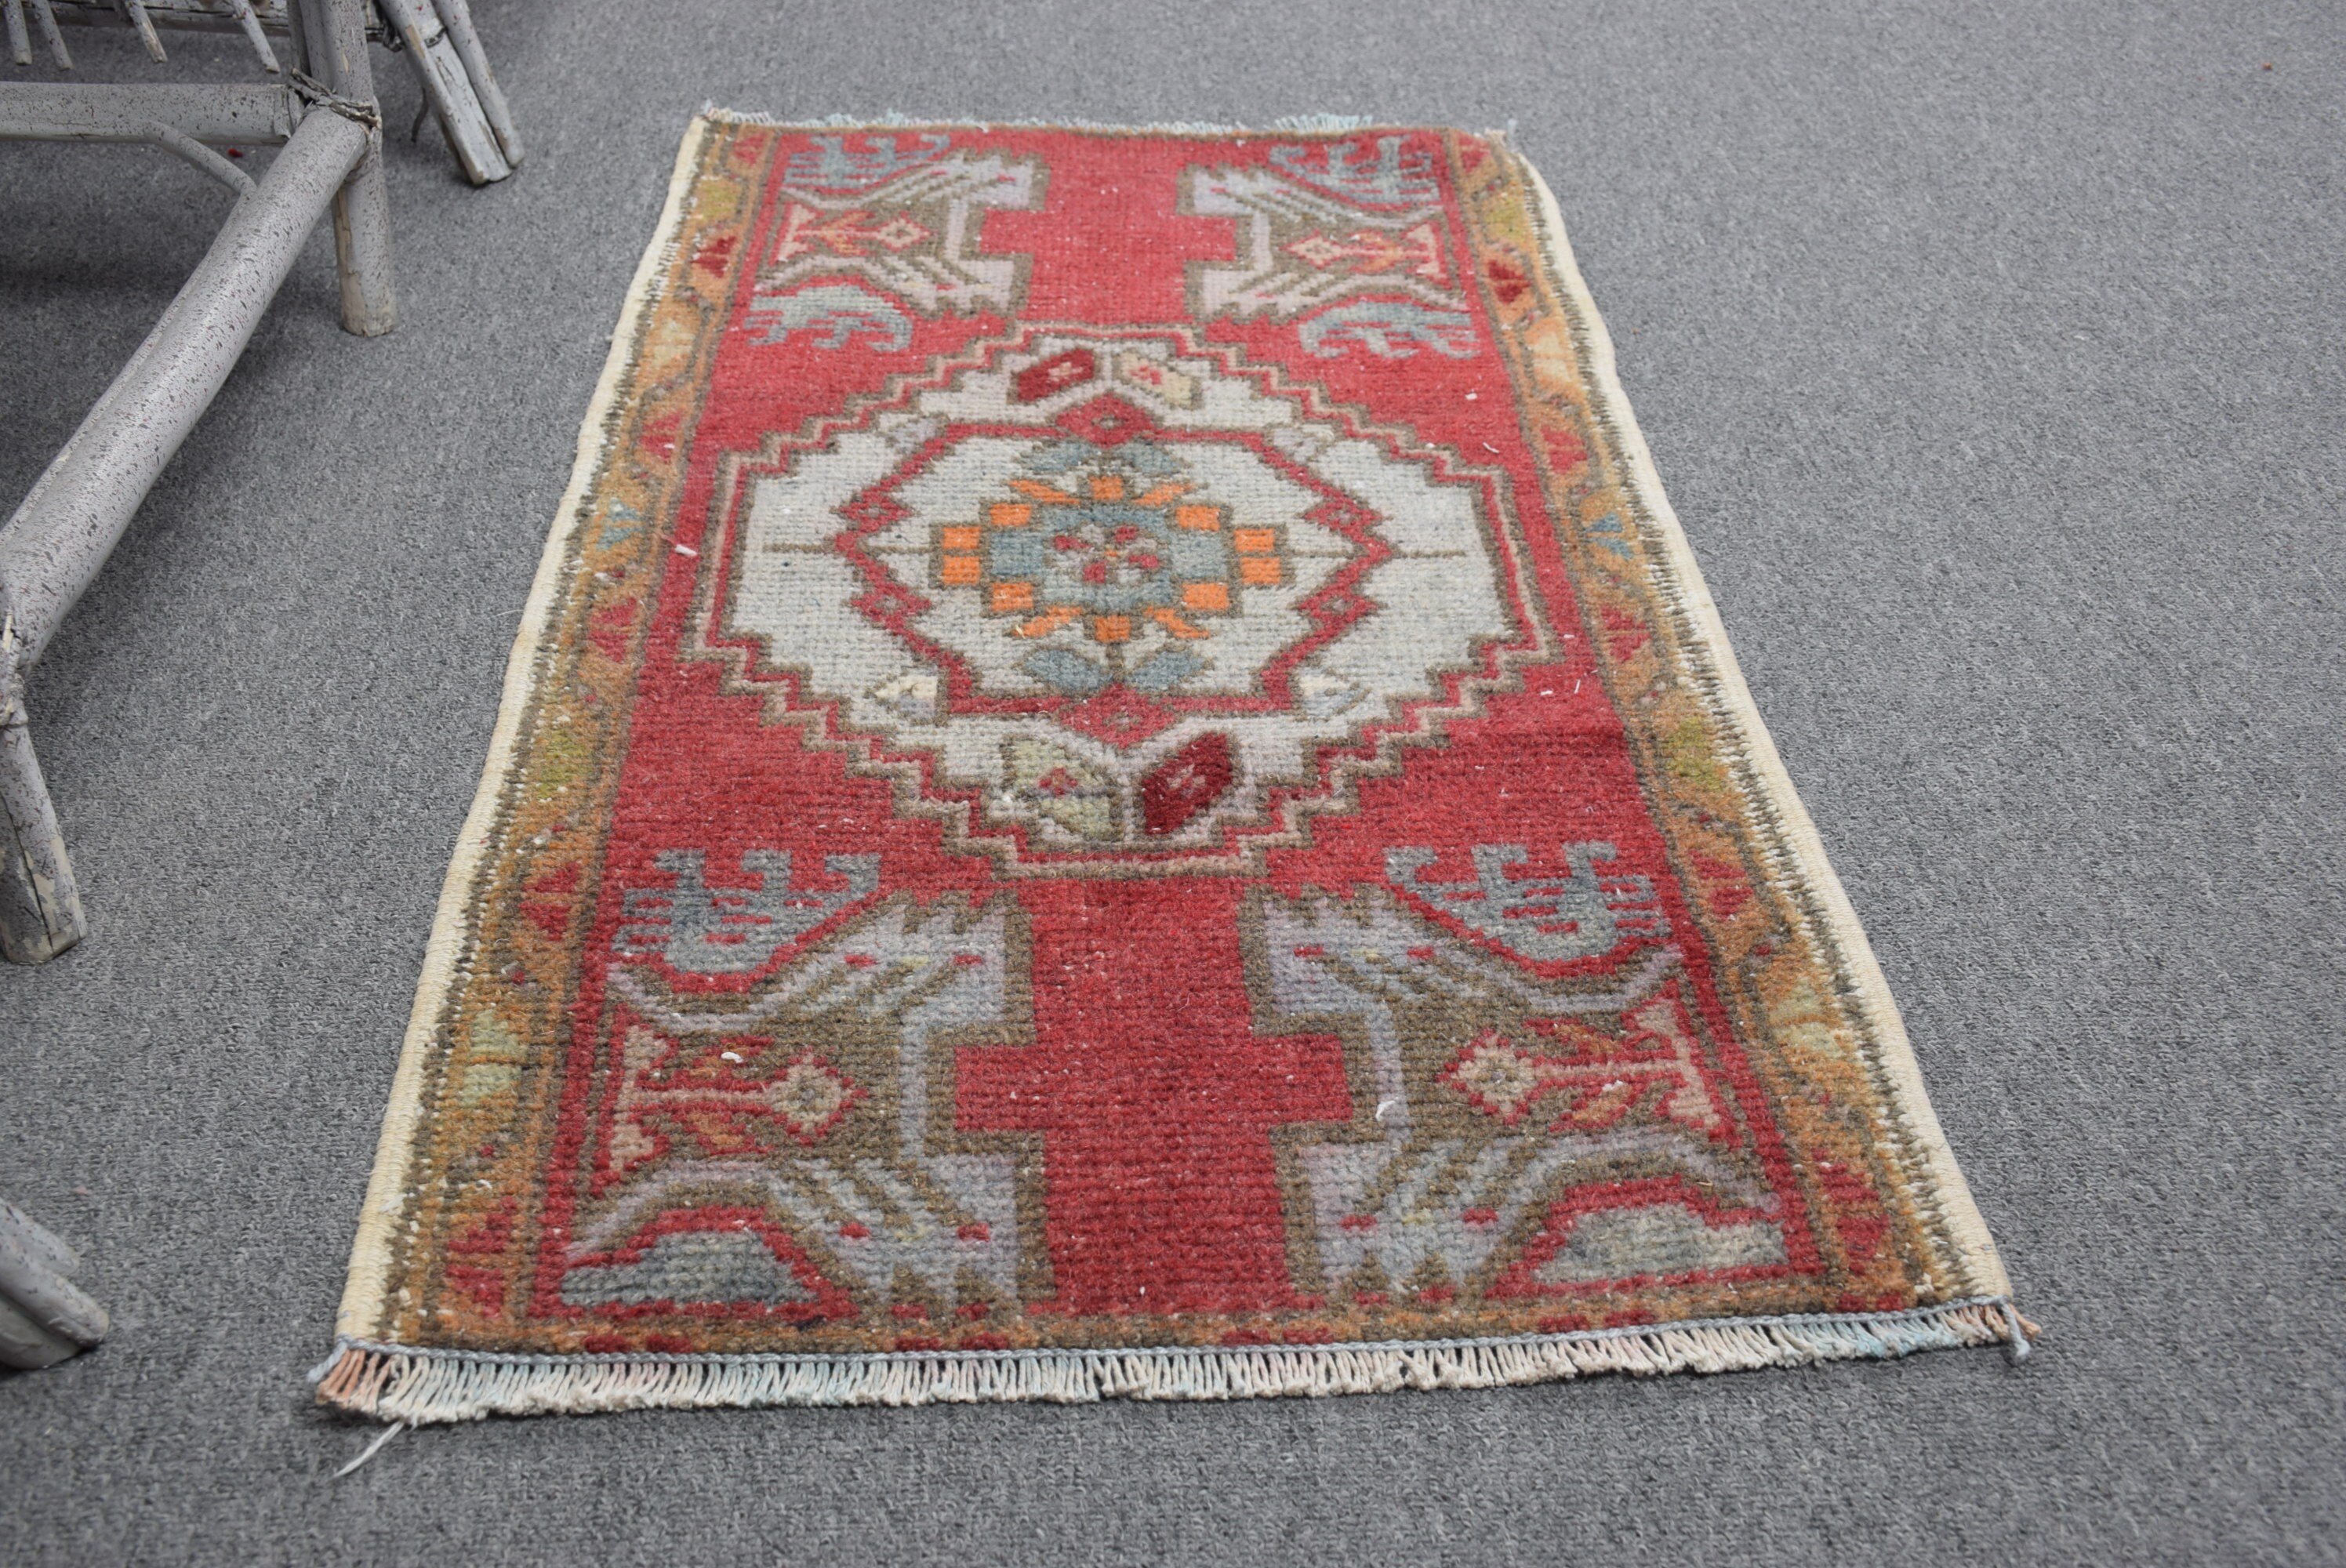 Wall Hanging Rug, Vintage Rugs, Turkish Rug, Car Mat Rug, Antique Rug, Cool Rug, 1.7x3 ft Small Rug, Rugs for Wall Hanging, Red Wool Rug